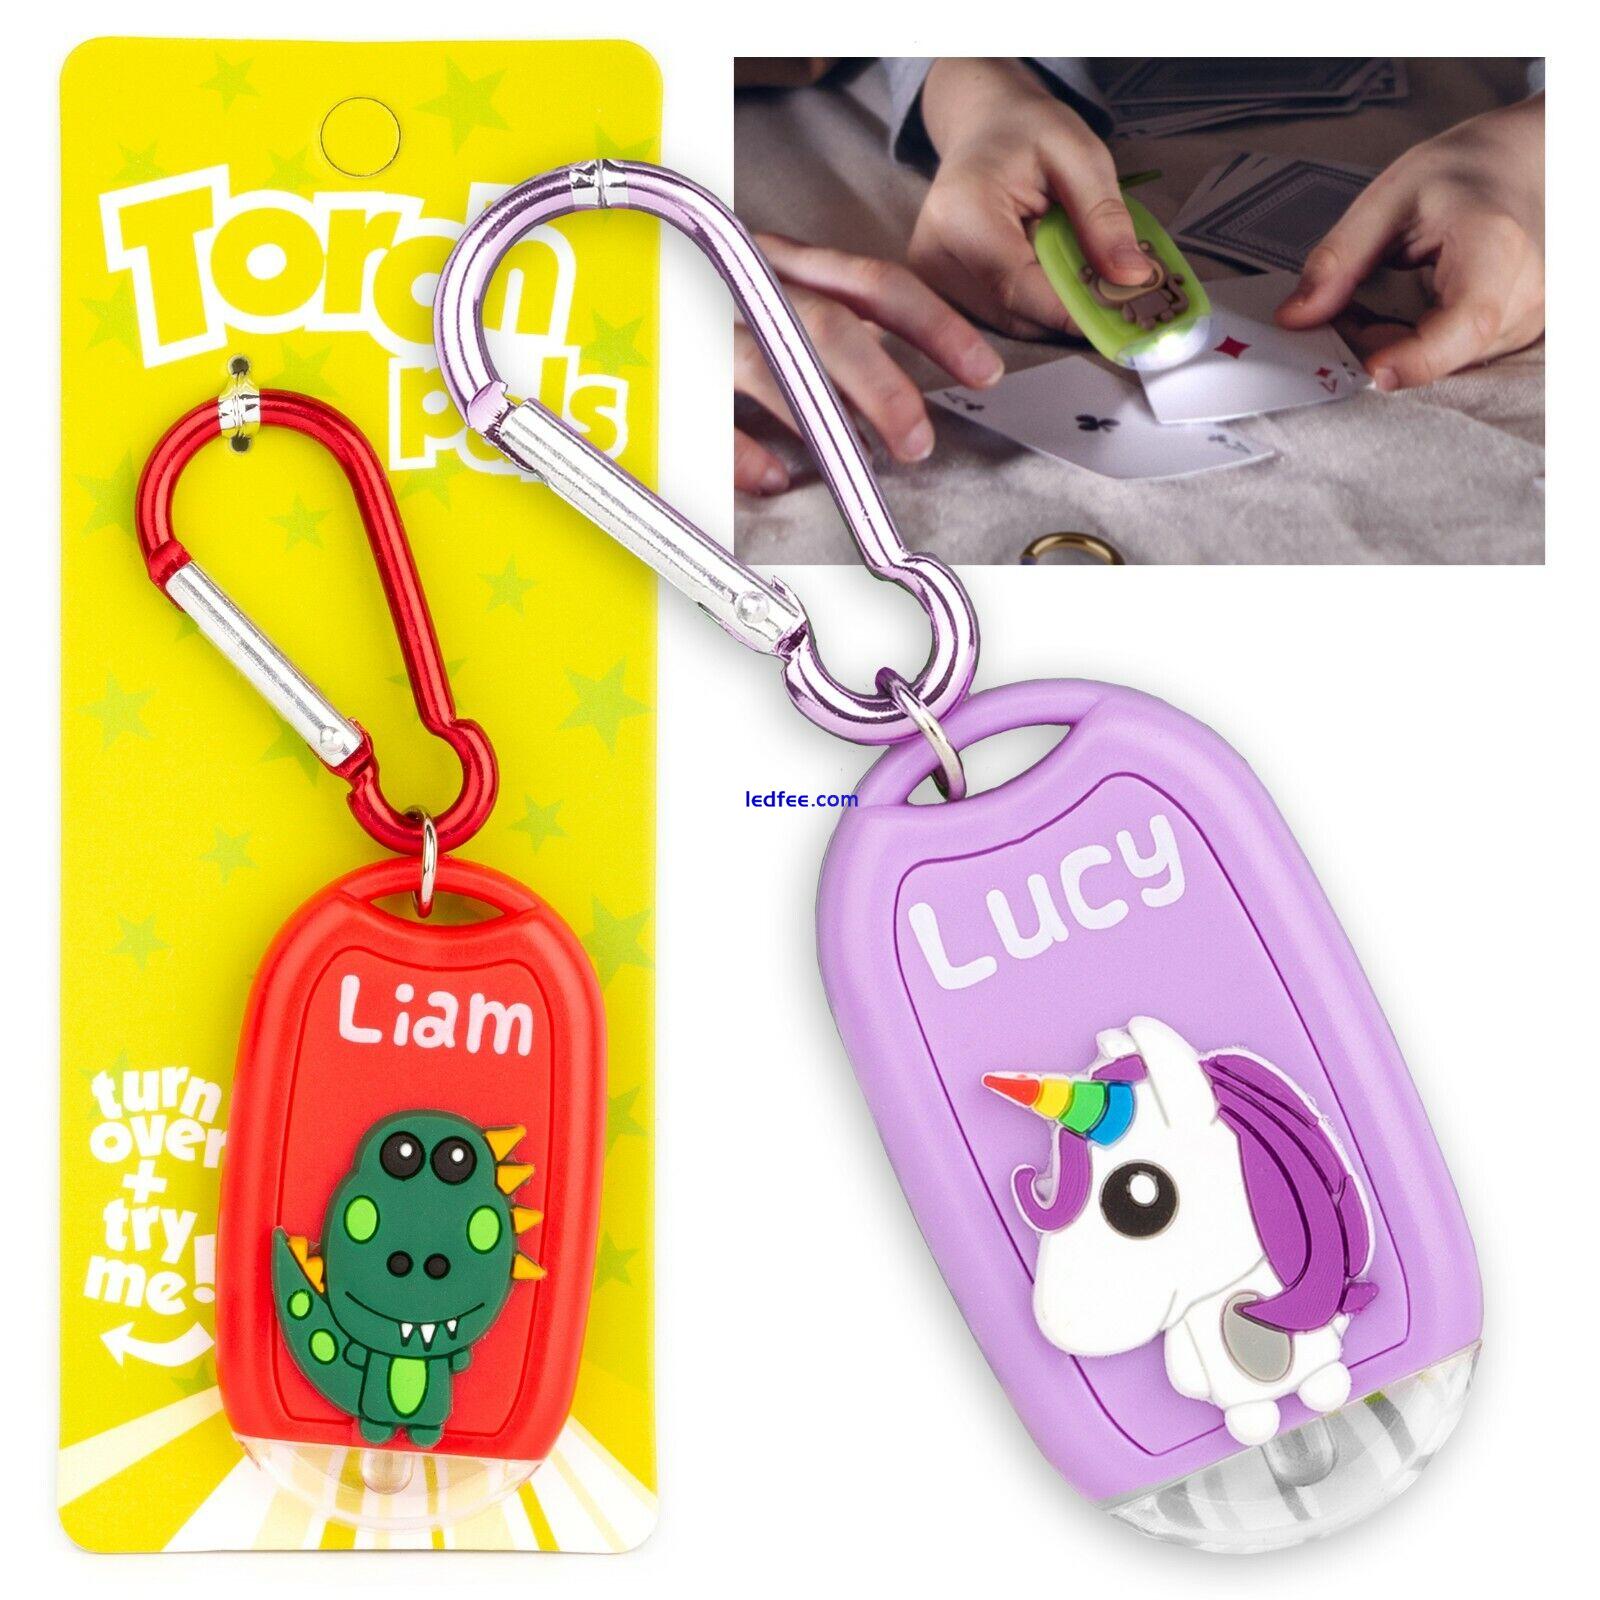 Kids Personalised Torch Novelty Mini LED Toy Light Carabiner Clip Names Animals 2 